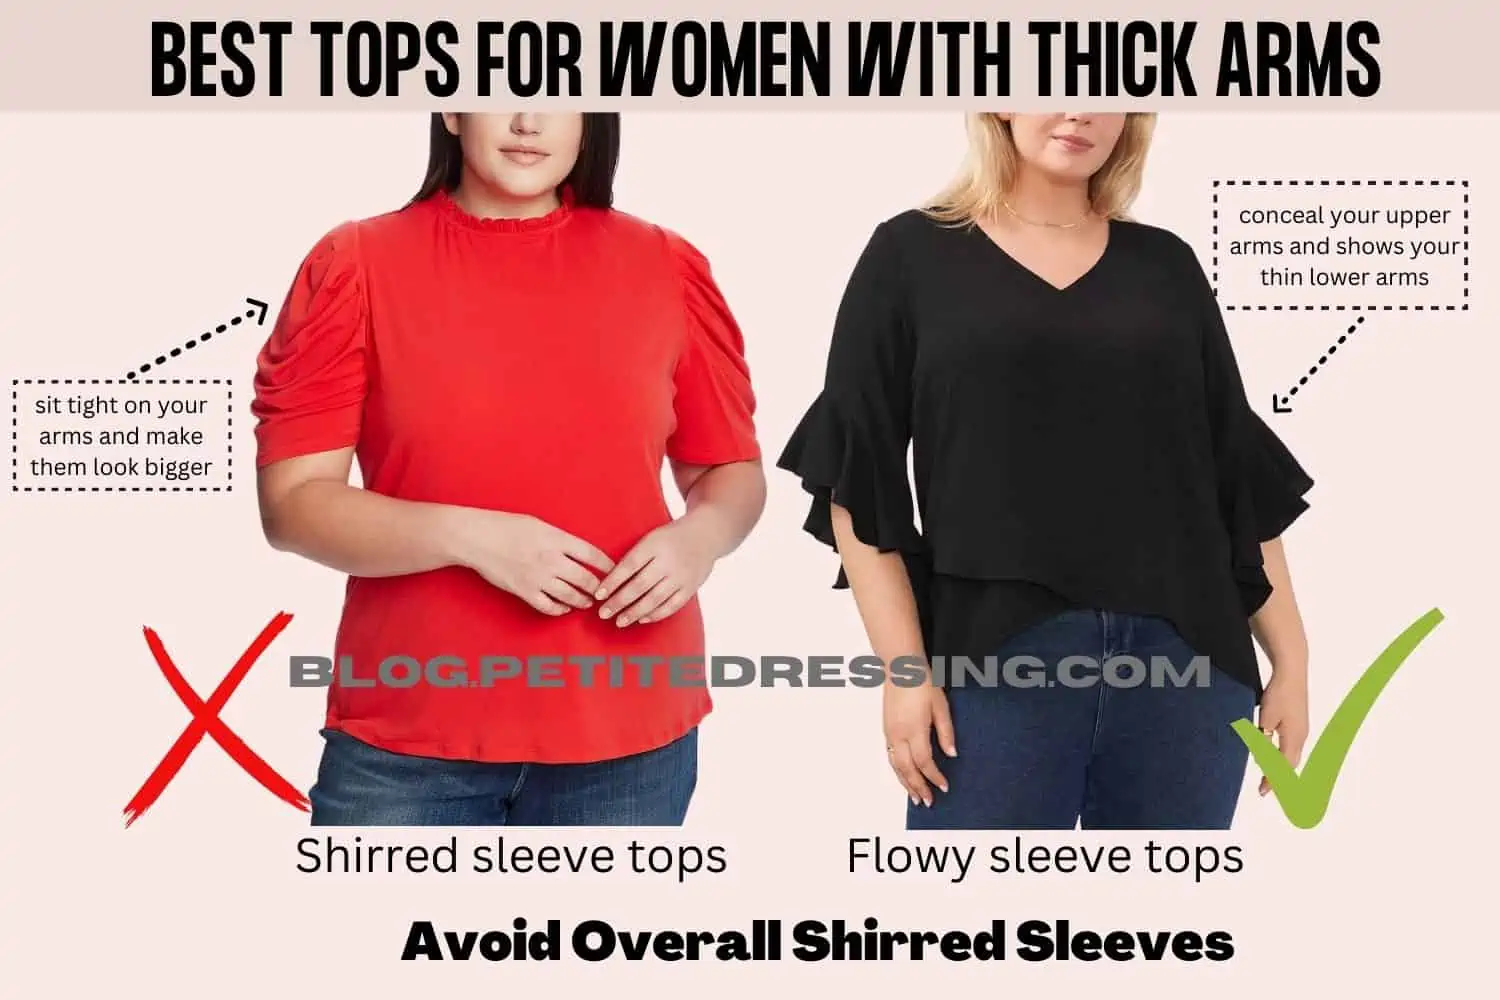 The Complete Tops Guide for Women With Thick Arms - Petite Dressing